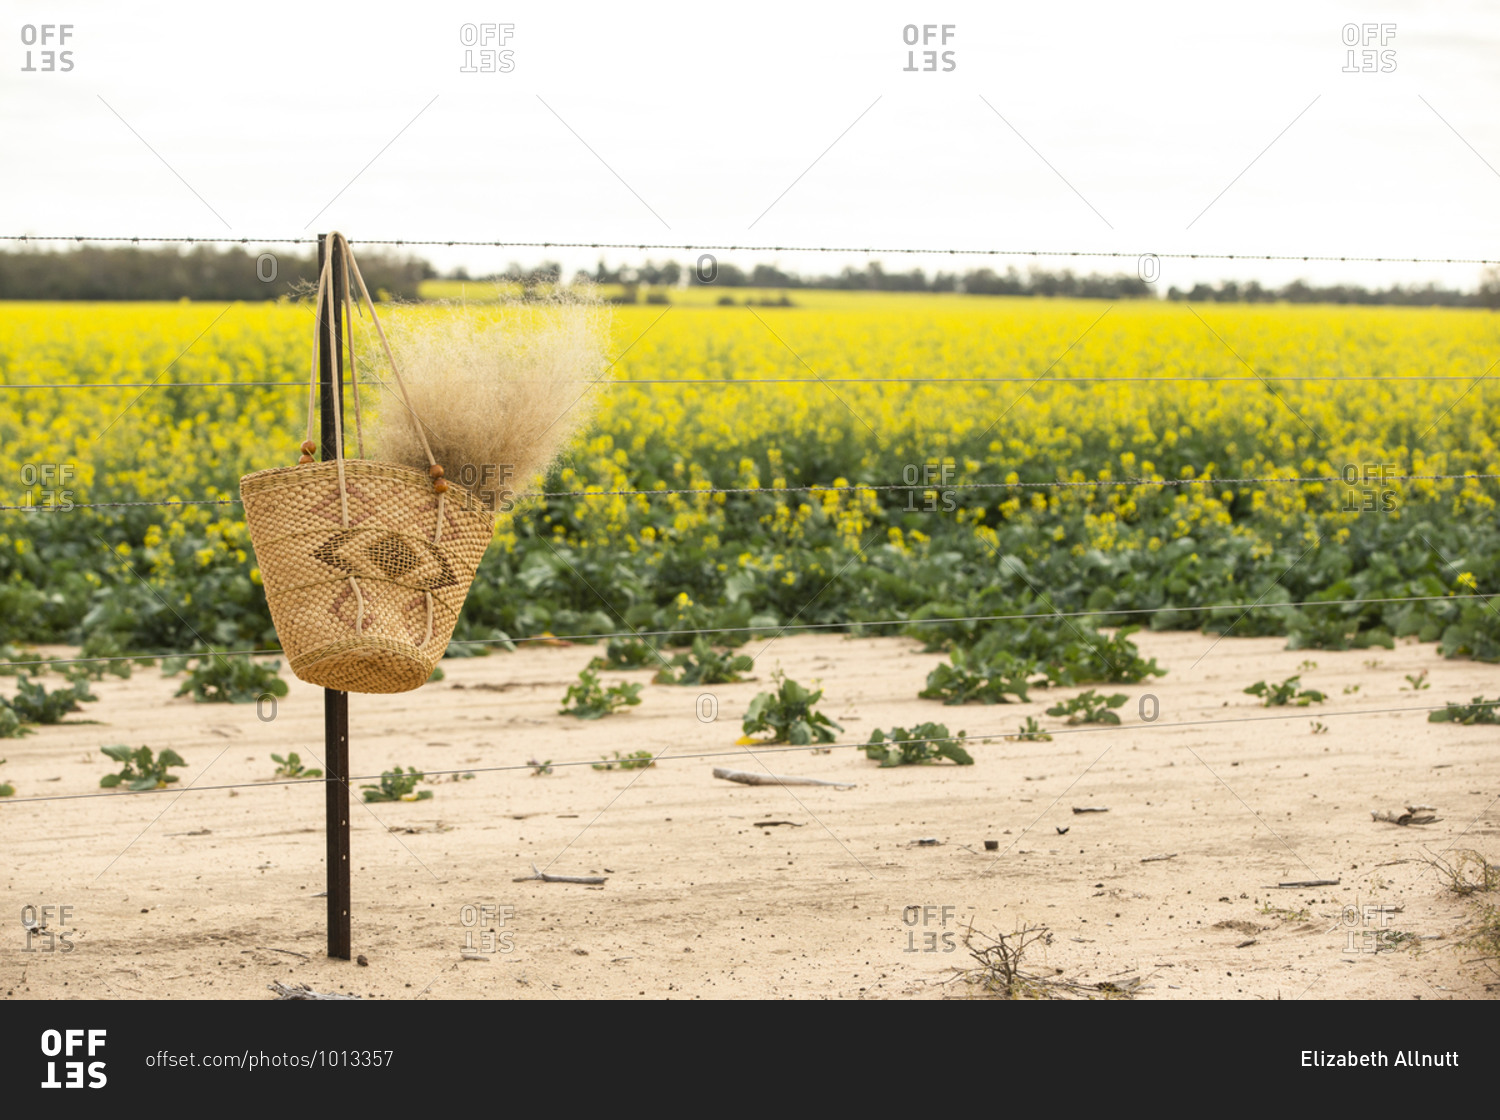 Basket filled with dried plant plumes hanging from a barbed wire fence by a canola field